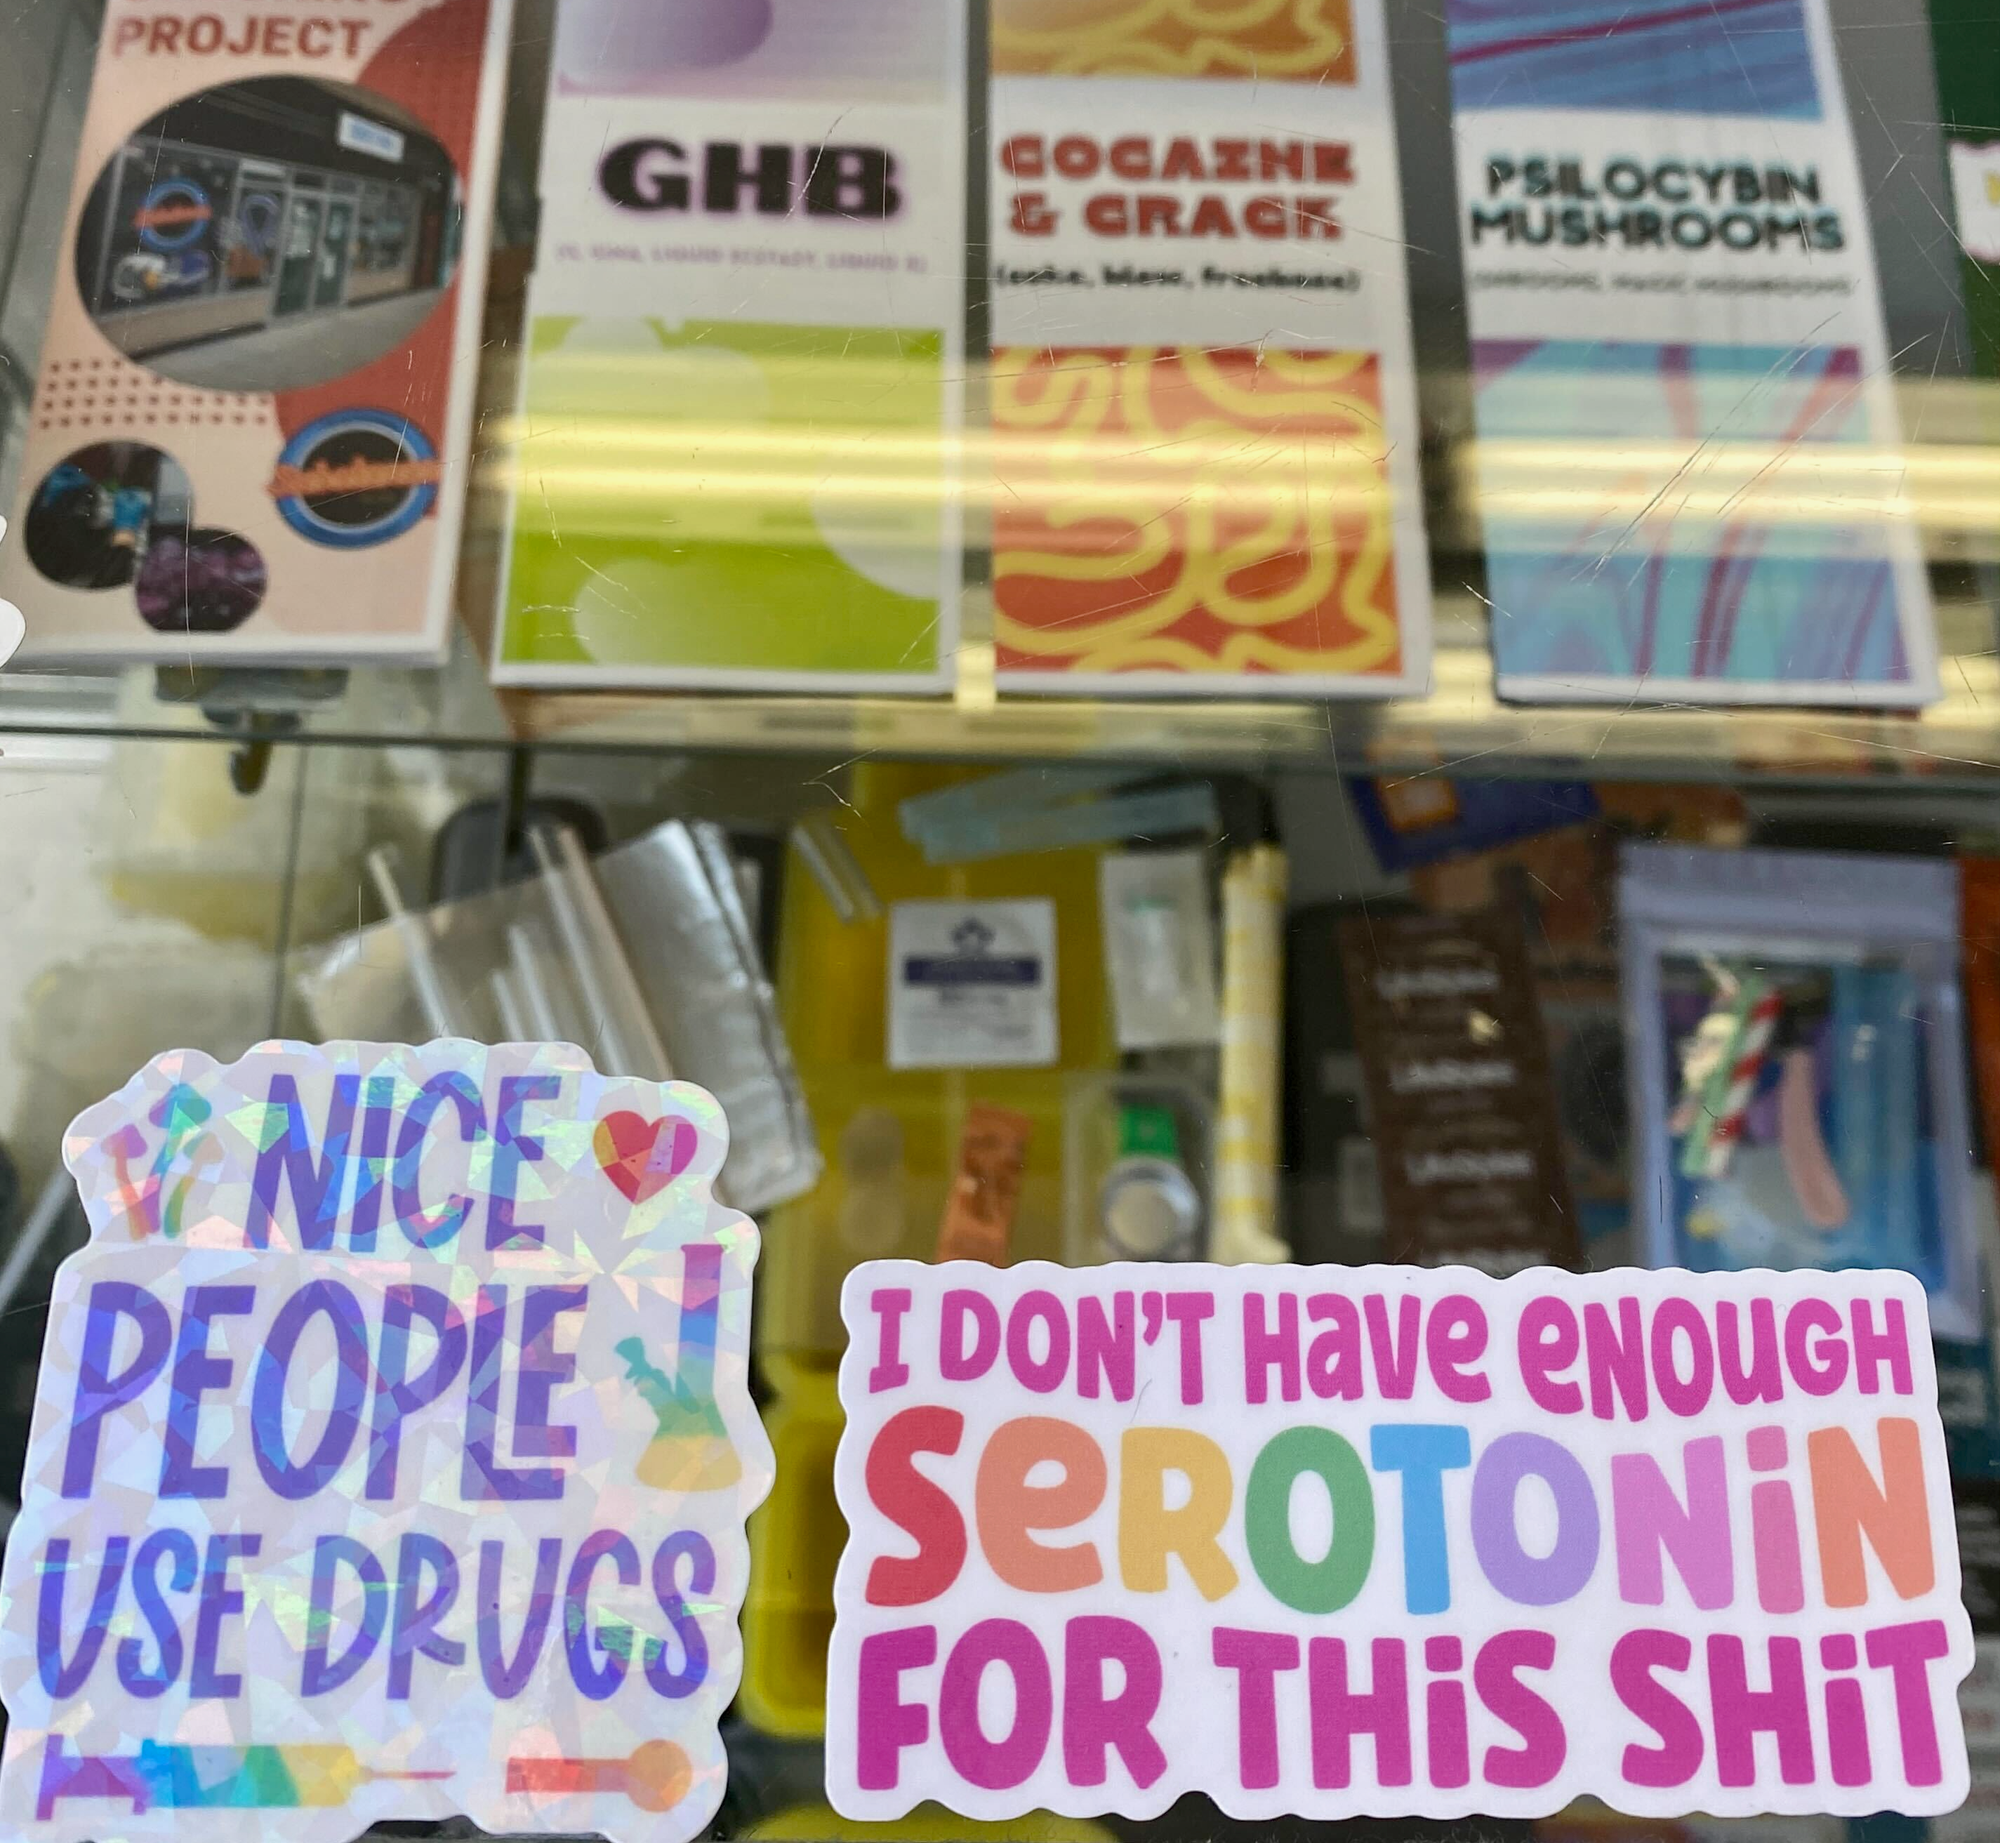 Image features a display case with harm reduction pamphlets, safer consumption supplies, and stickers